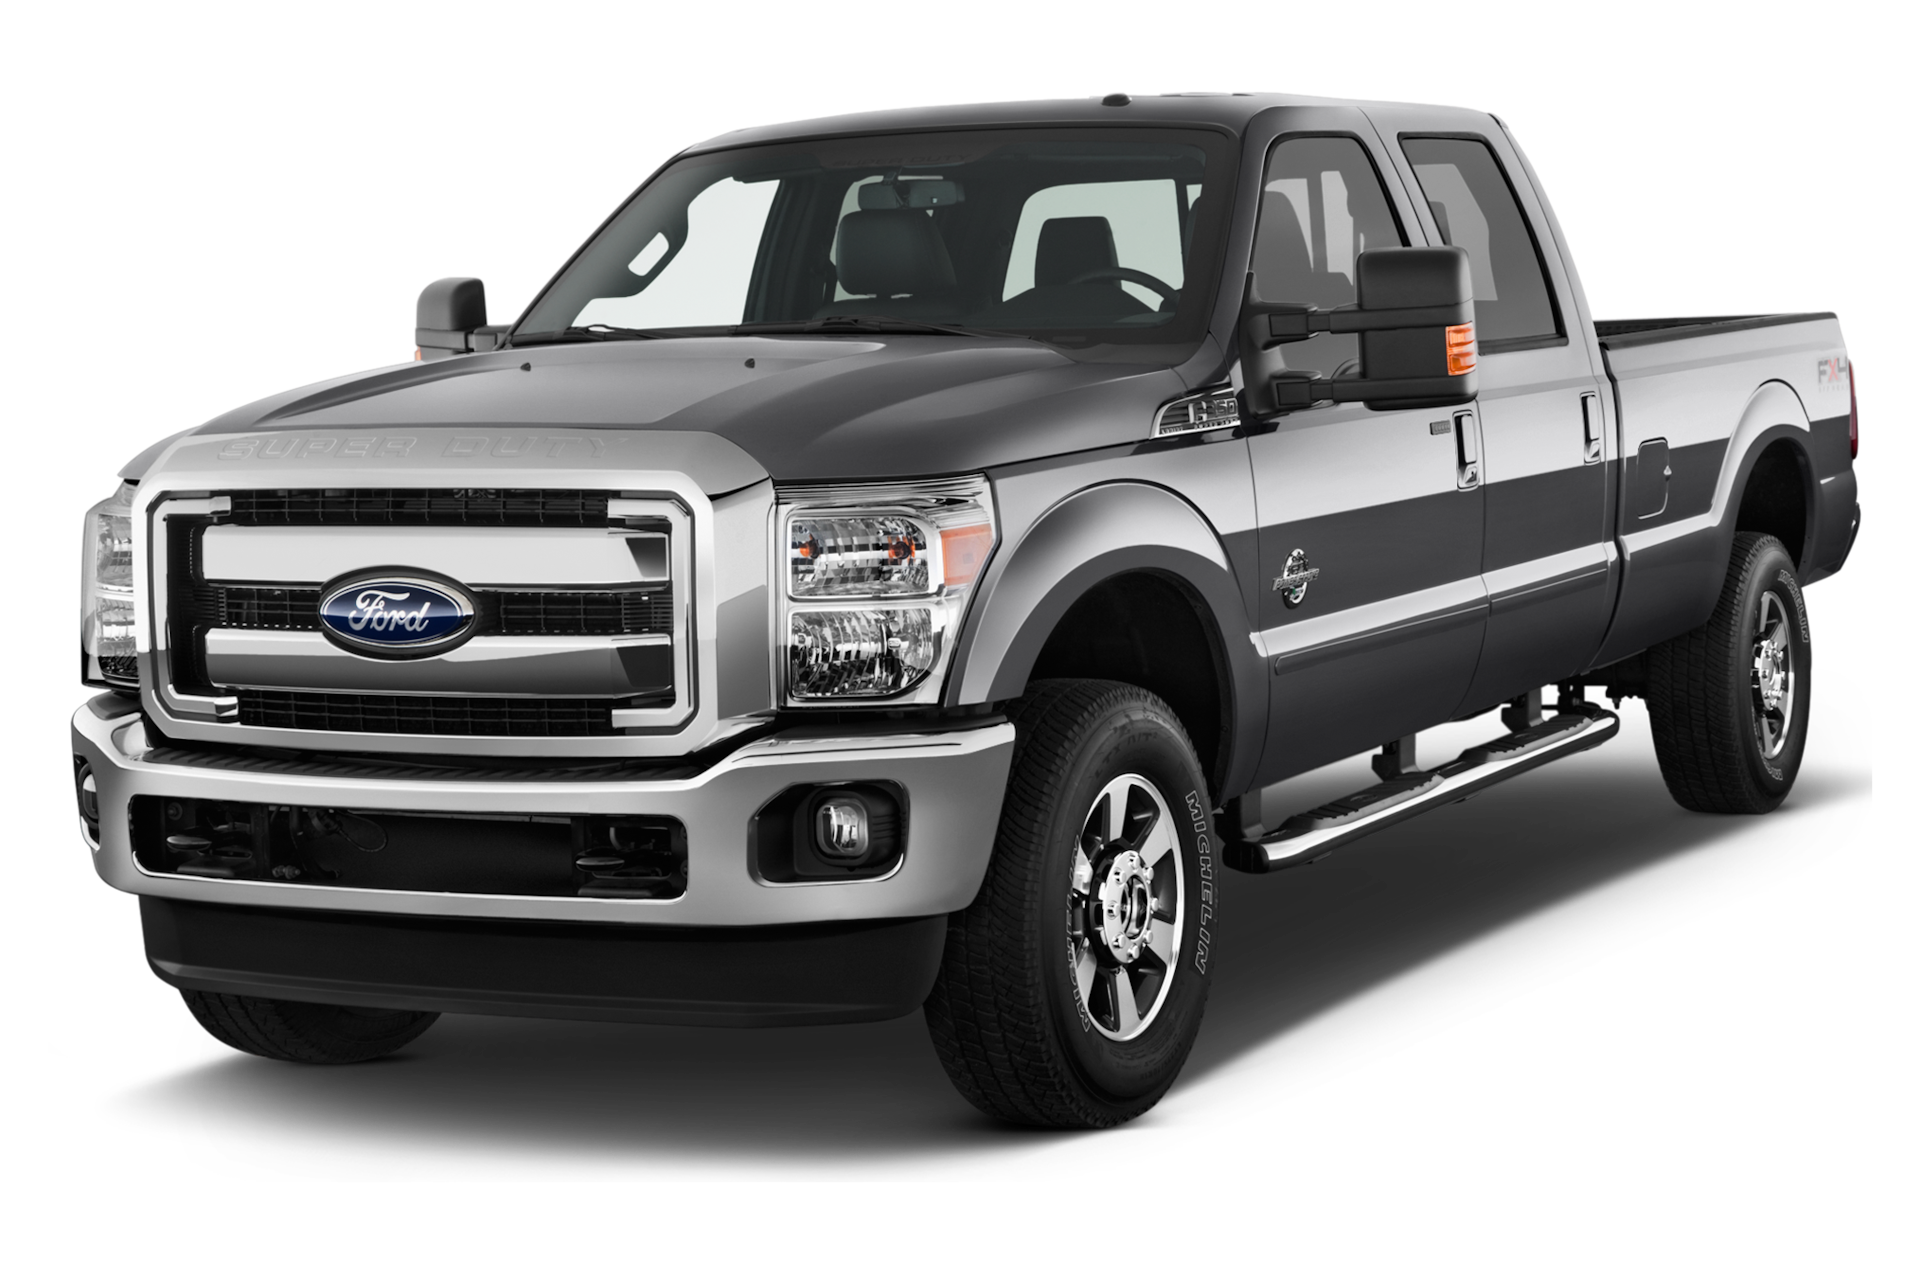 2011 Ford F-350 Prices, Reviews, and Photos - MotorTrend